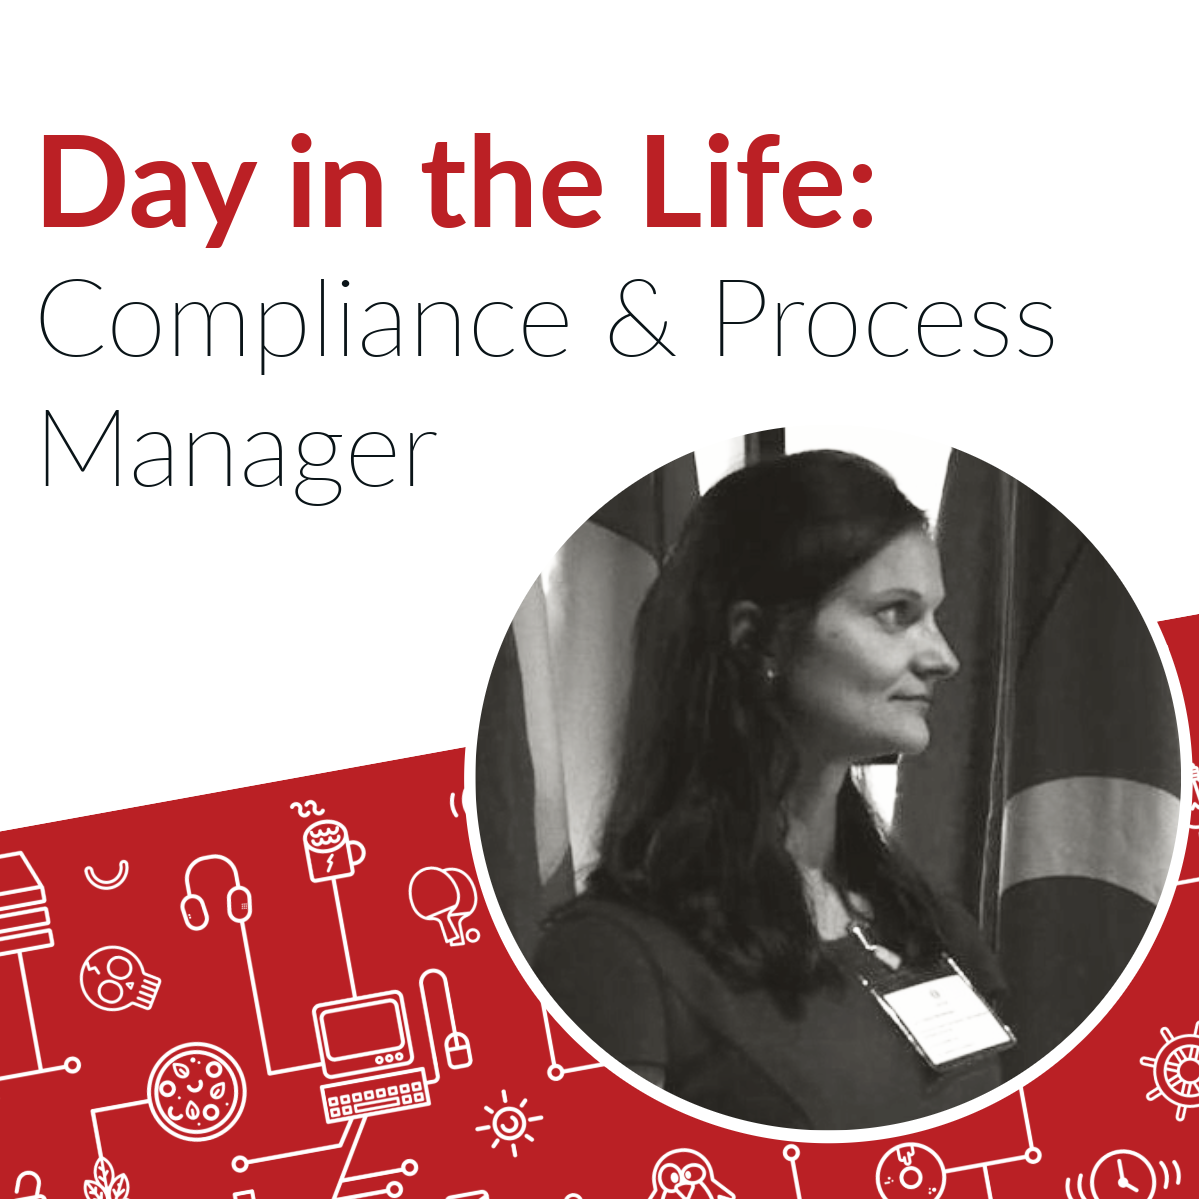 Inspire Inclusion: A Day in the Life of Compliance and Process Manager.